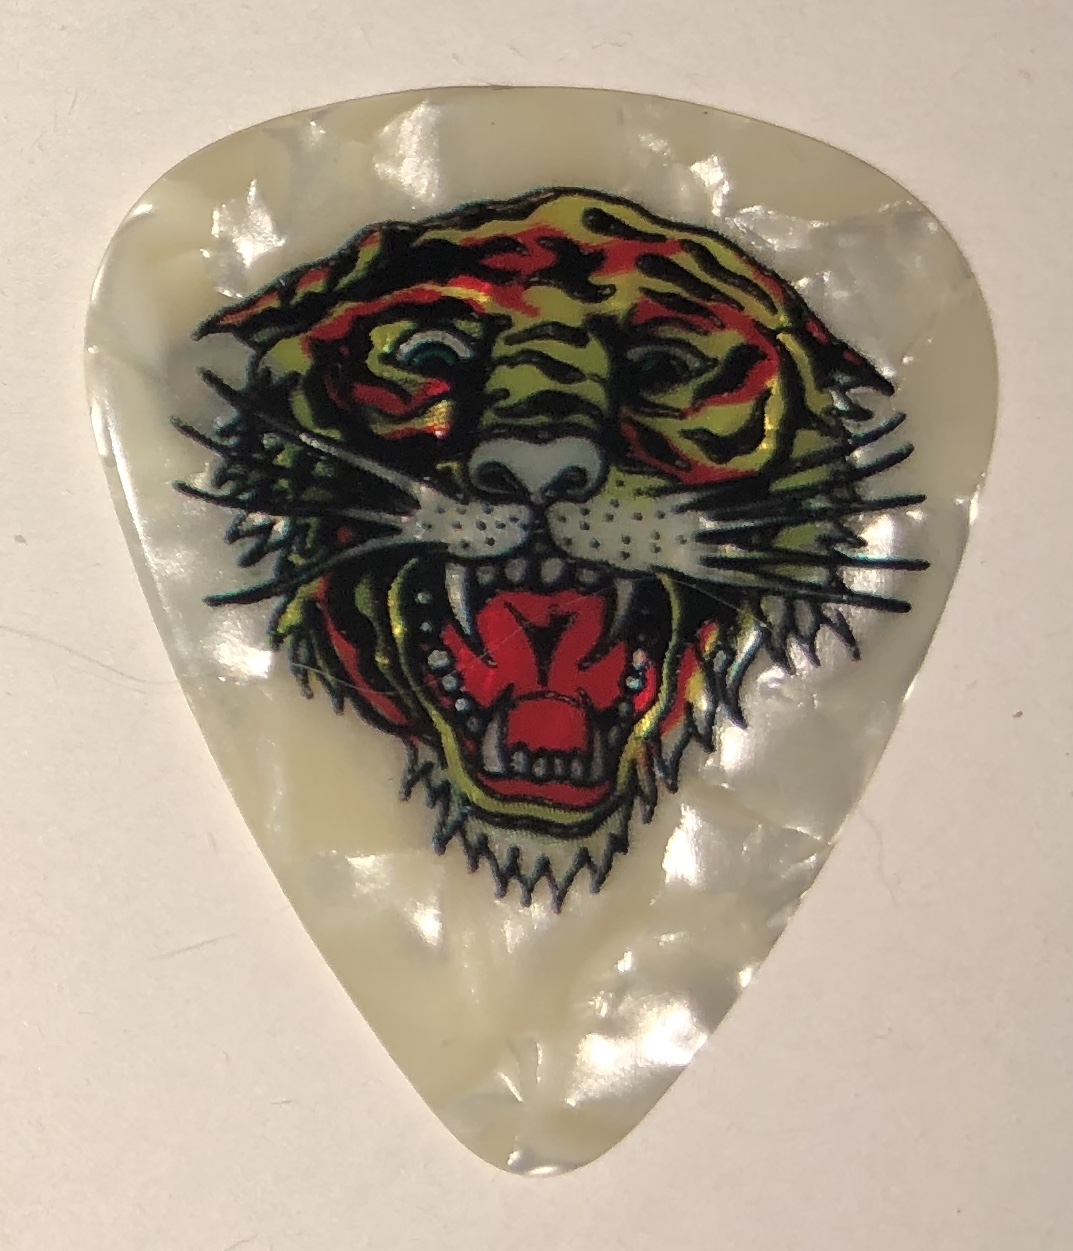 Tiger Face Tattoo” Guitar Pick by Ed Hardy - Pickbay